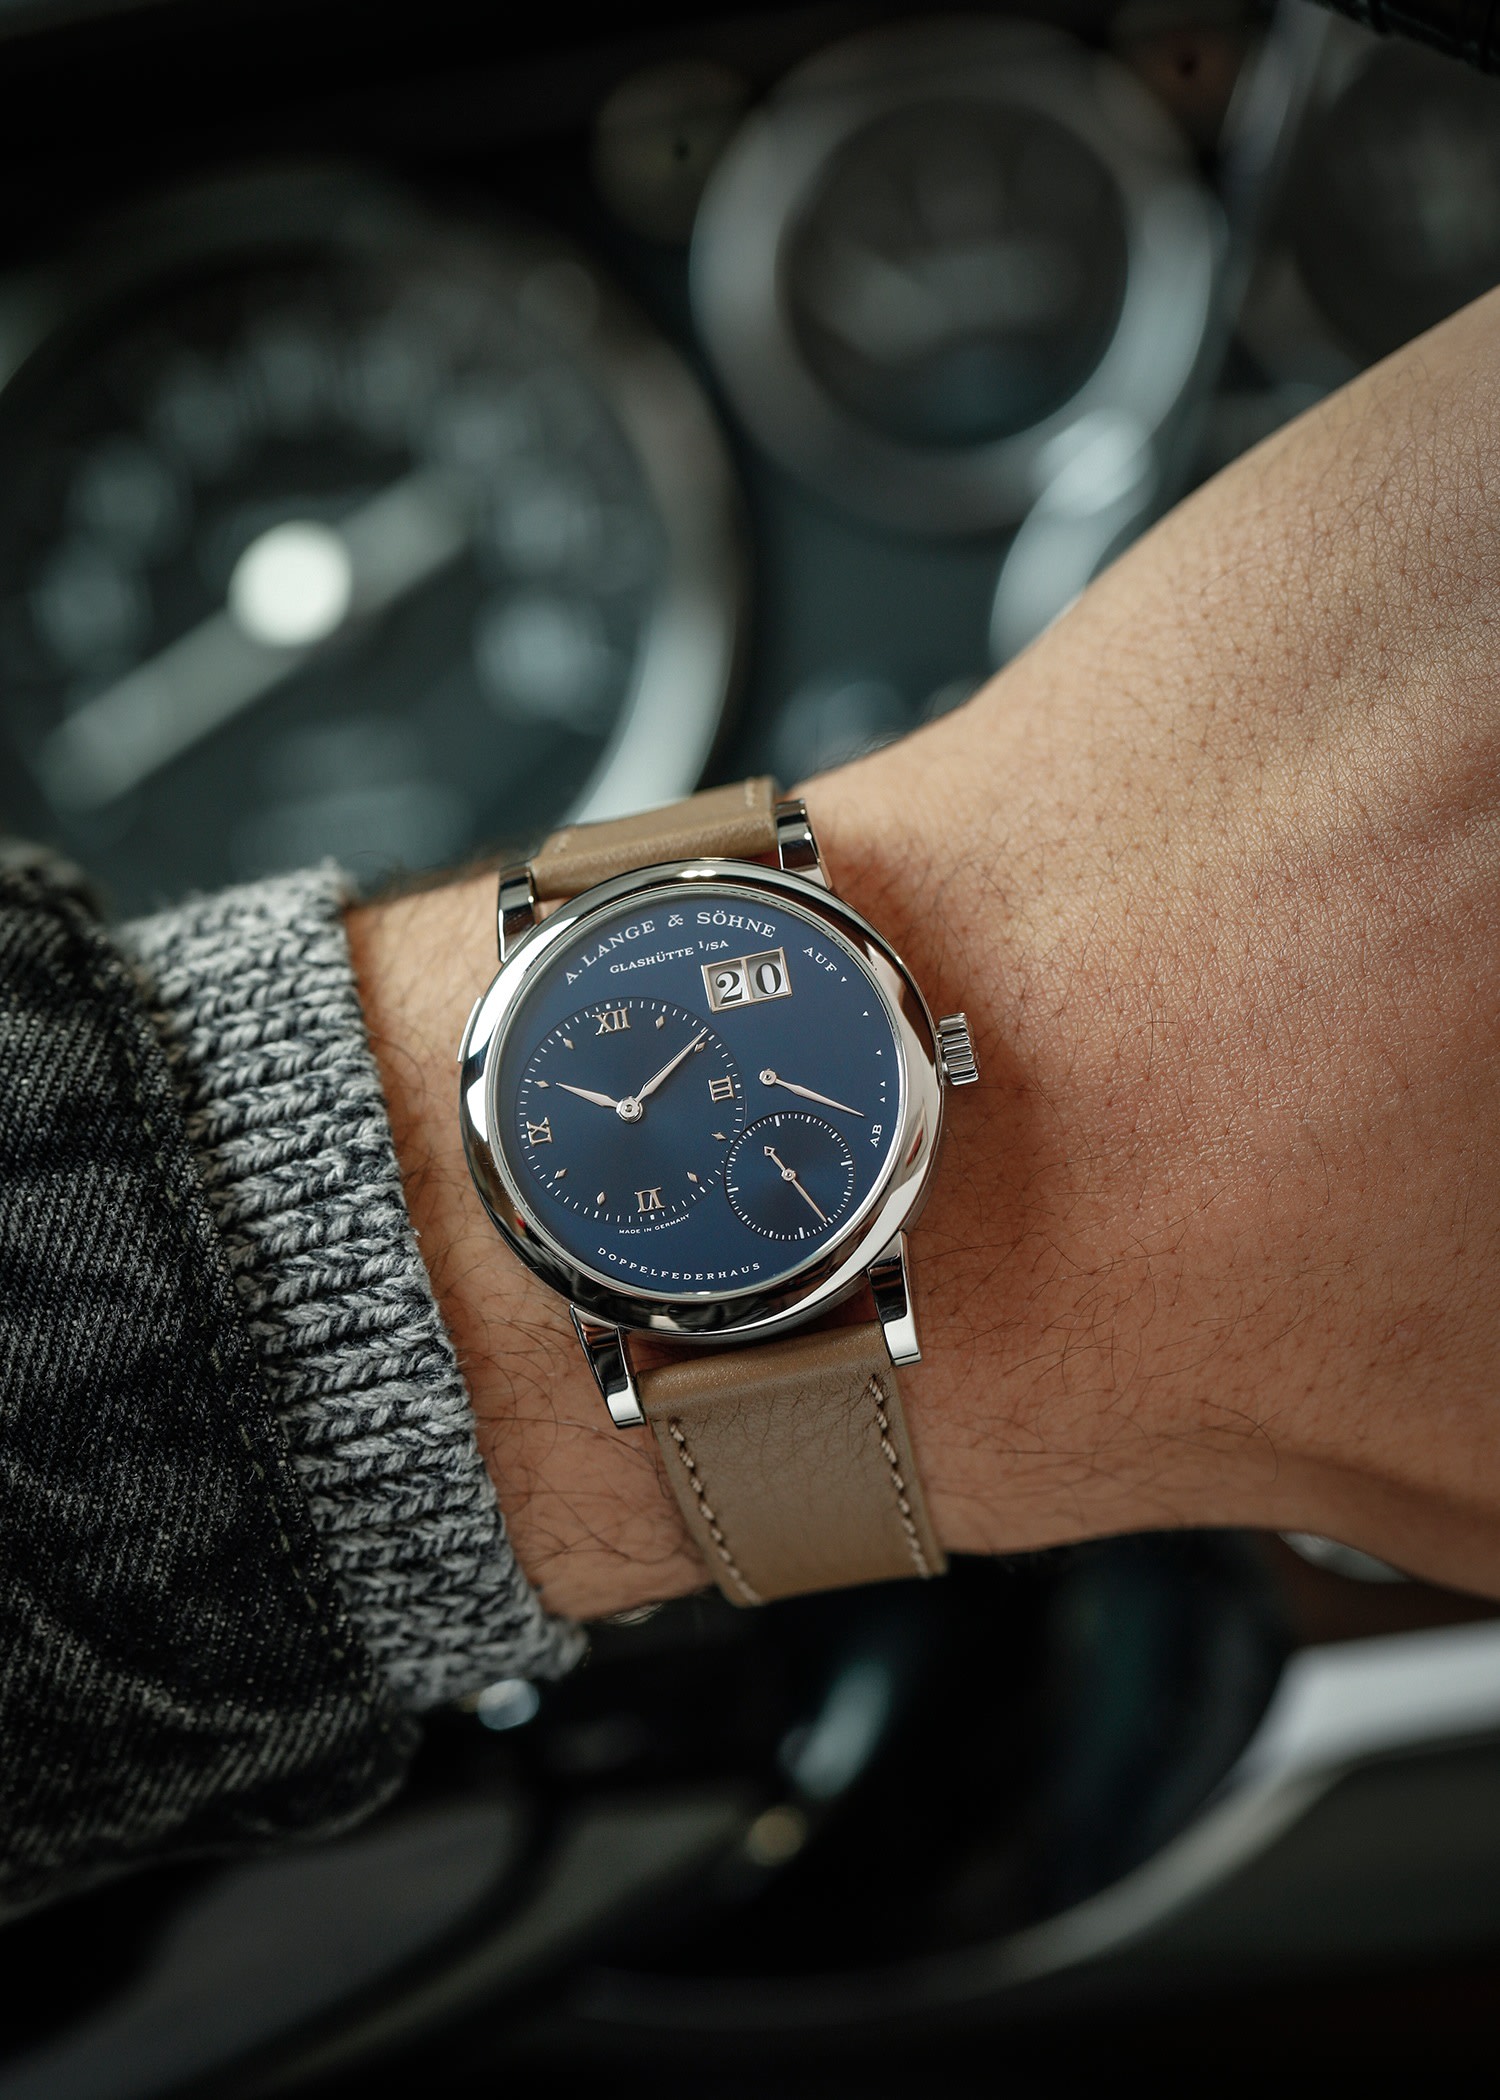 The Second Lange 1 Watch